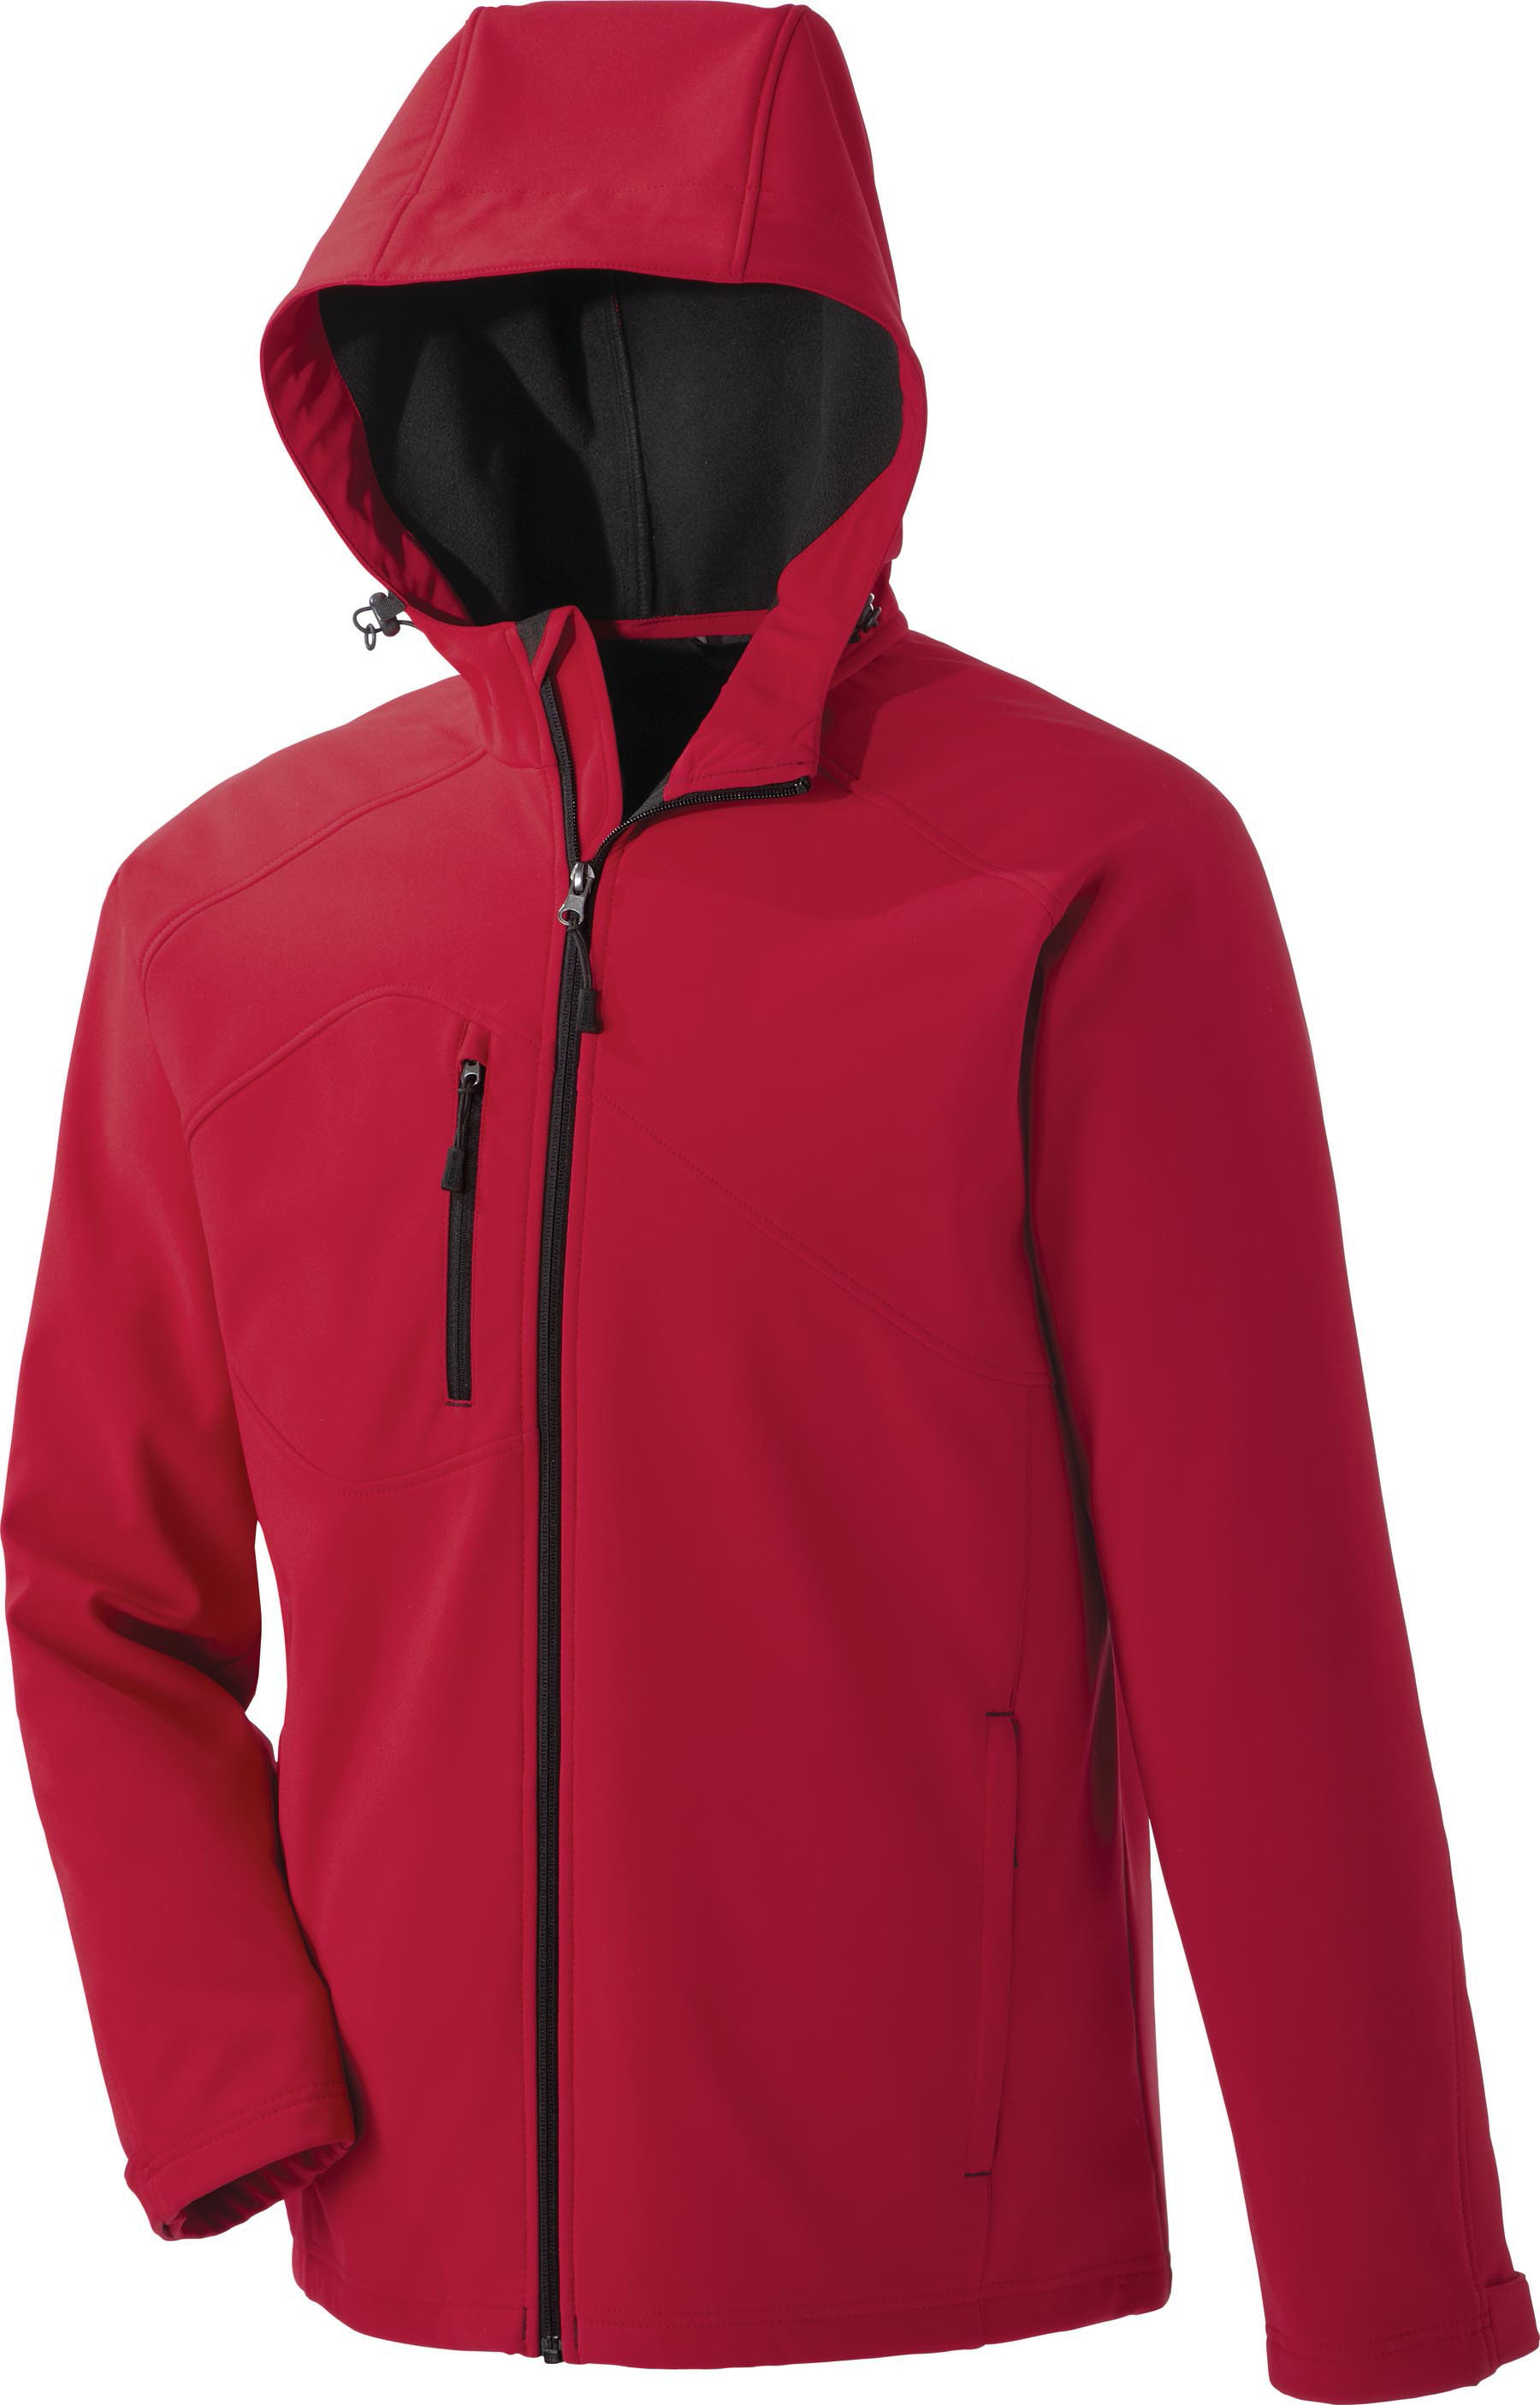 North End 88166 - Men's Prospect Two-Layer Fleece Bonded Soft Shell Hooded Jacket